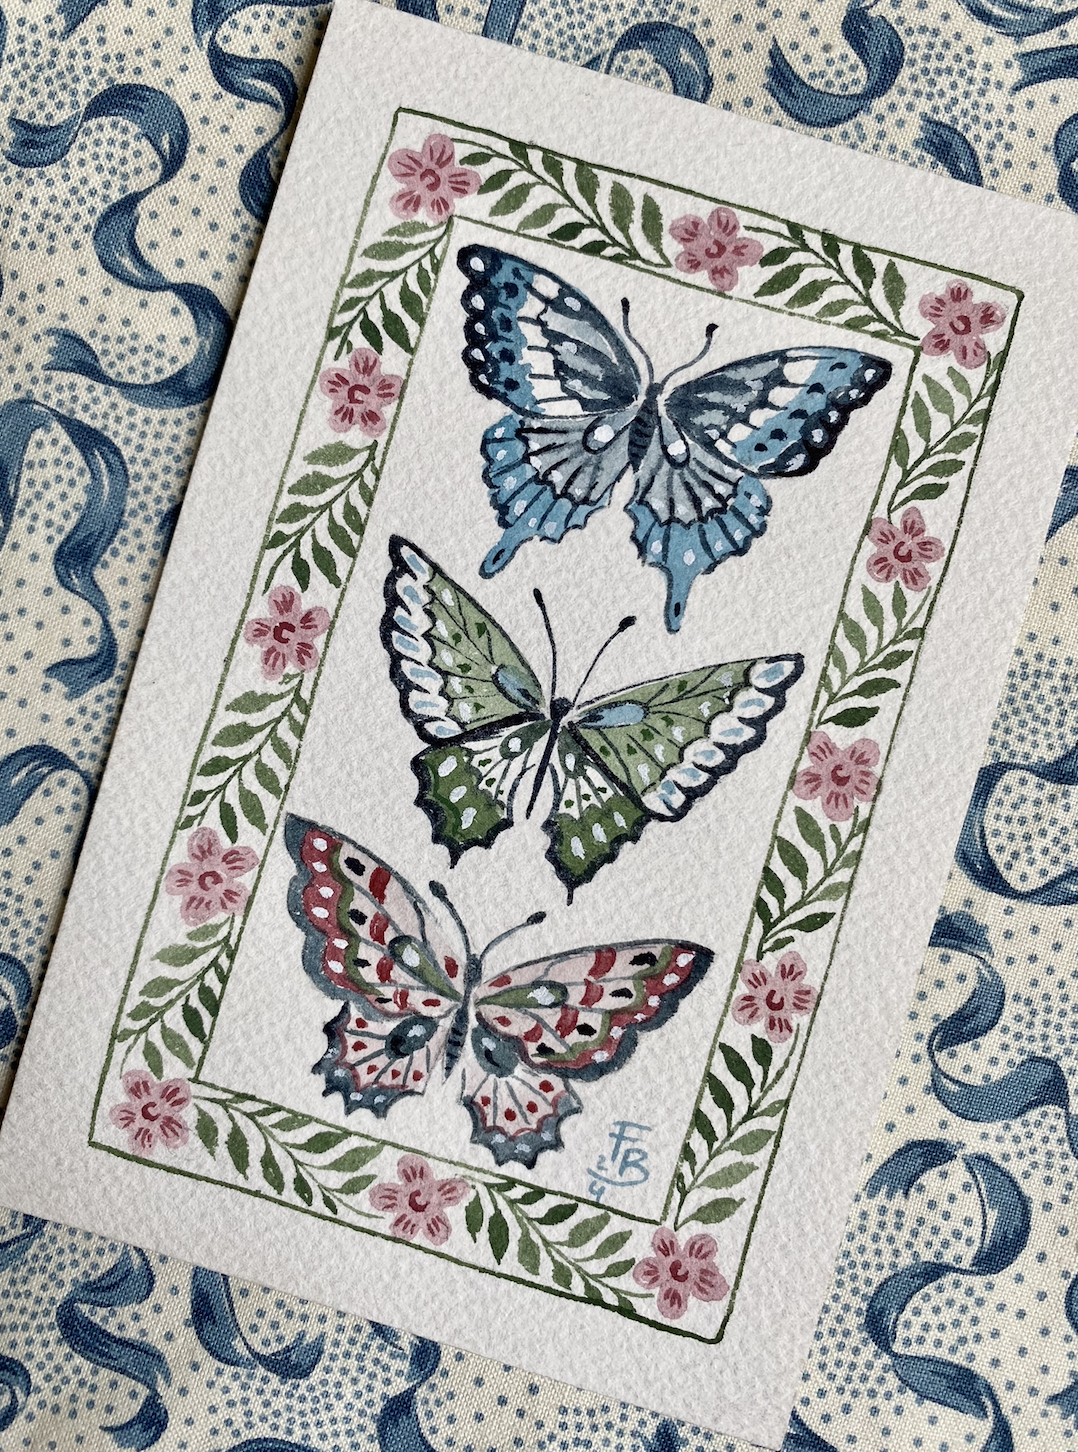 Miniature Watercolour painting - Butterfly trio